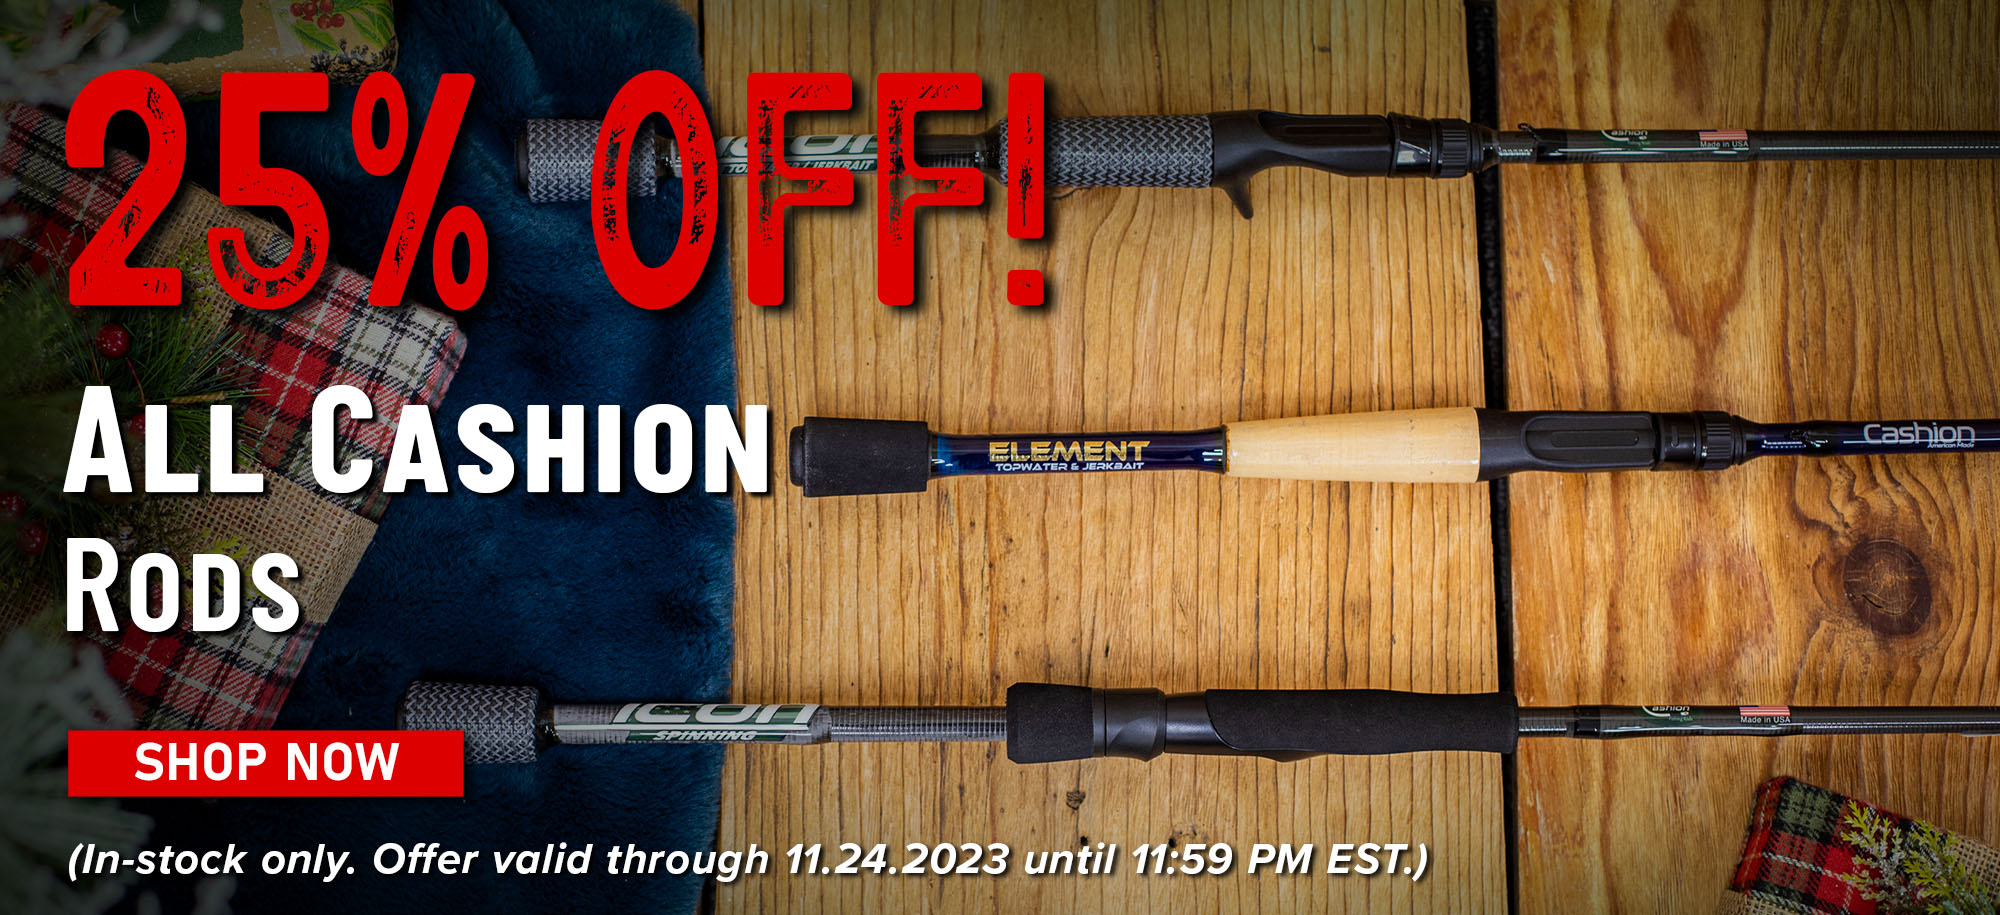 25% Off! All Cashion Rods Shop Now (In-stock only. Offer valid through 11.24.2023 until 11:59 PM EST.)